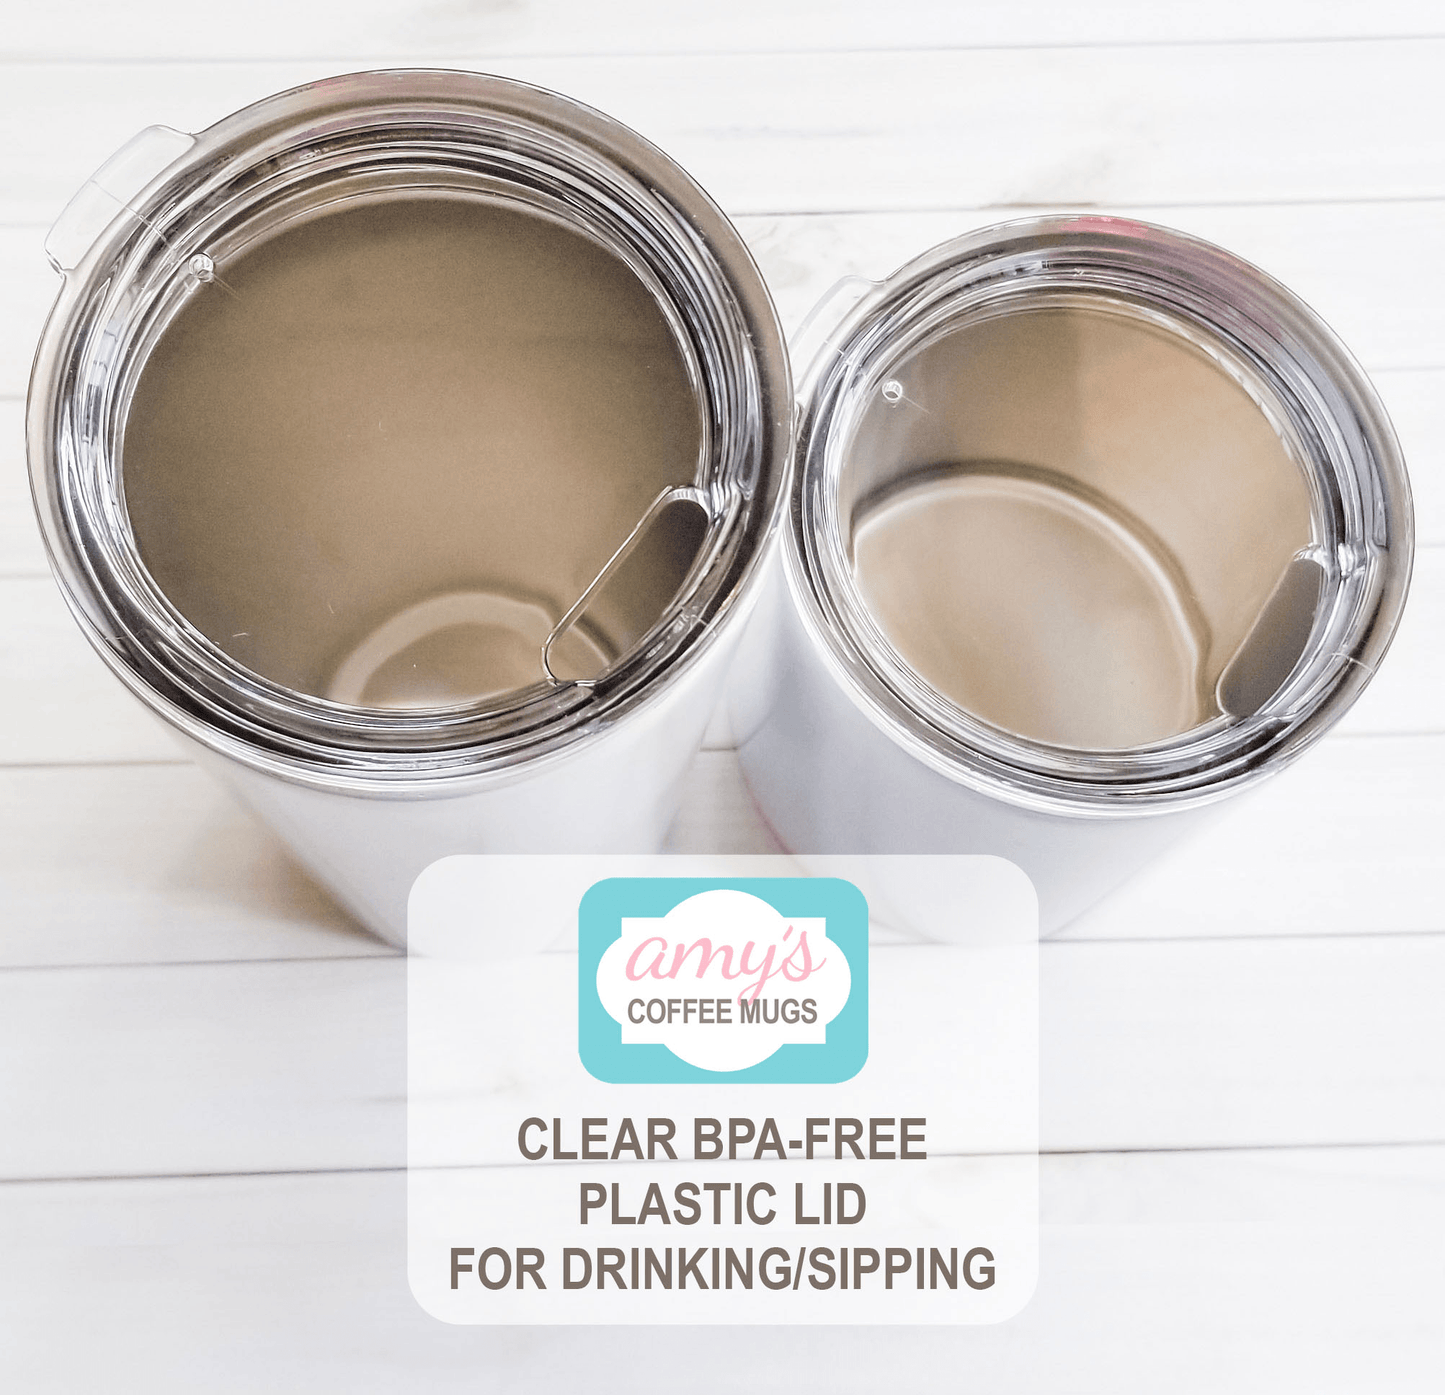 clear bpa-free plastic lid for drinking/sipping, tumbler cups at Amy's Coffee Mugs